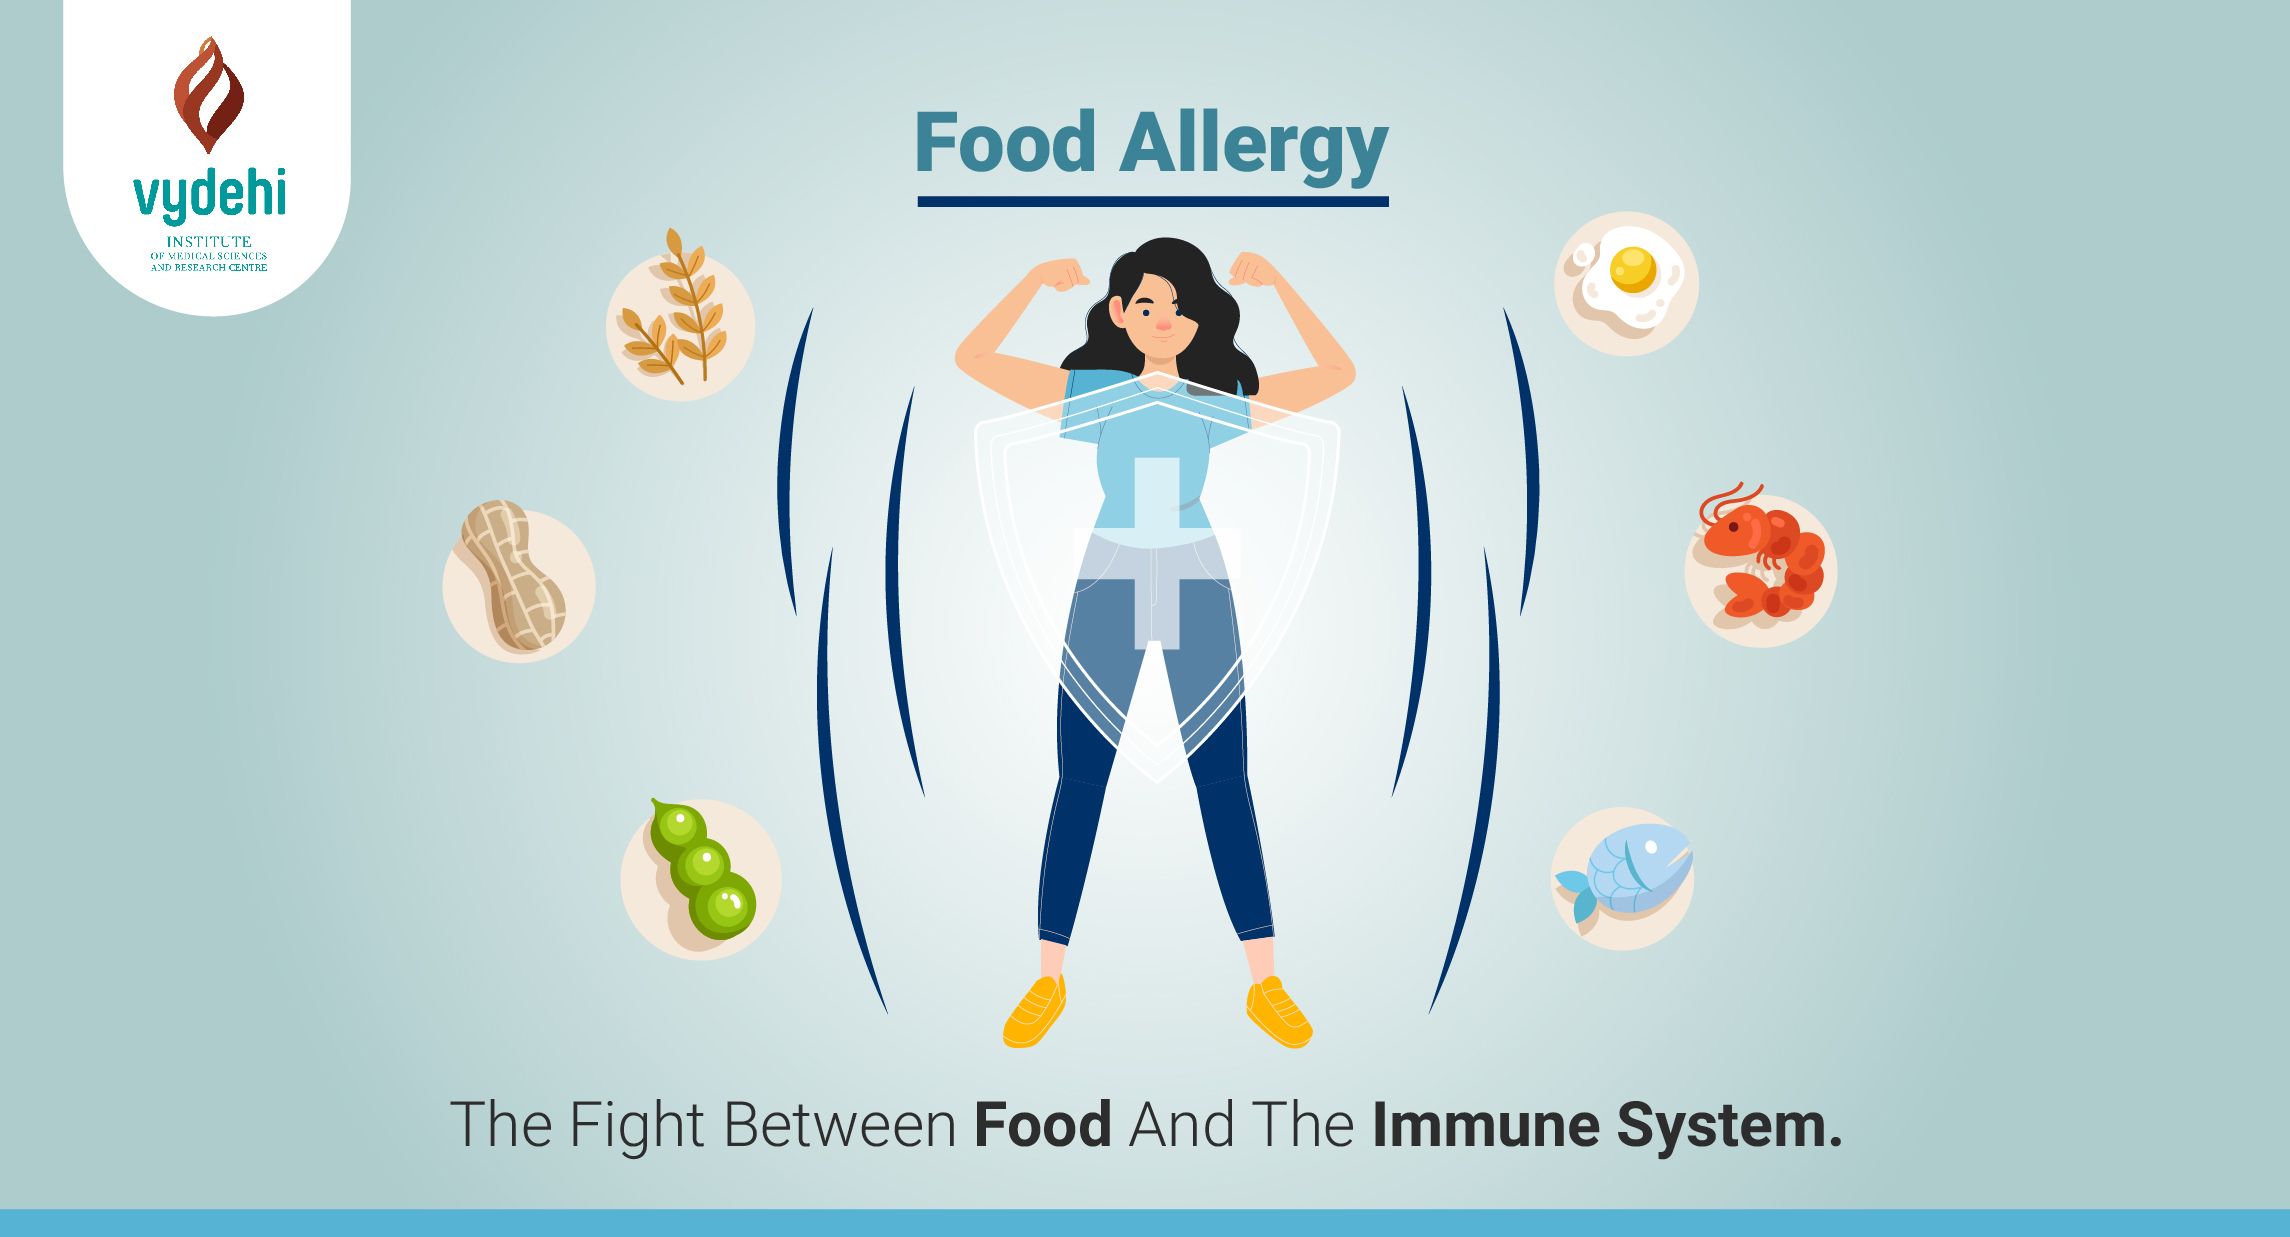 Food Allergy: The Fight Between Food And The Immune System.